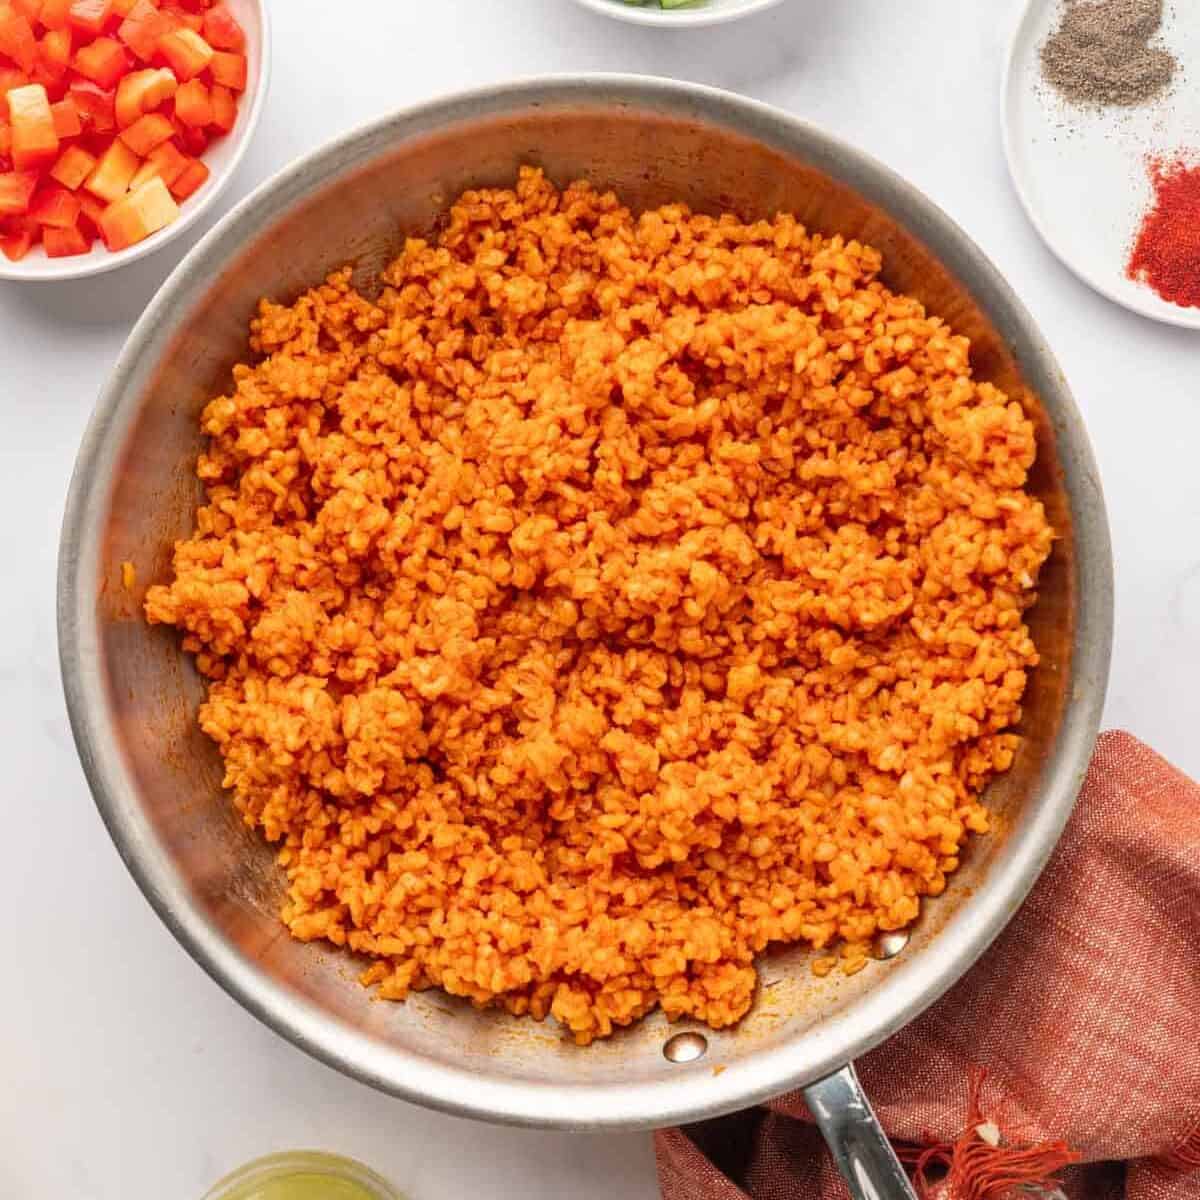 Cooked bulgur mixed with the tomato sauce.